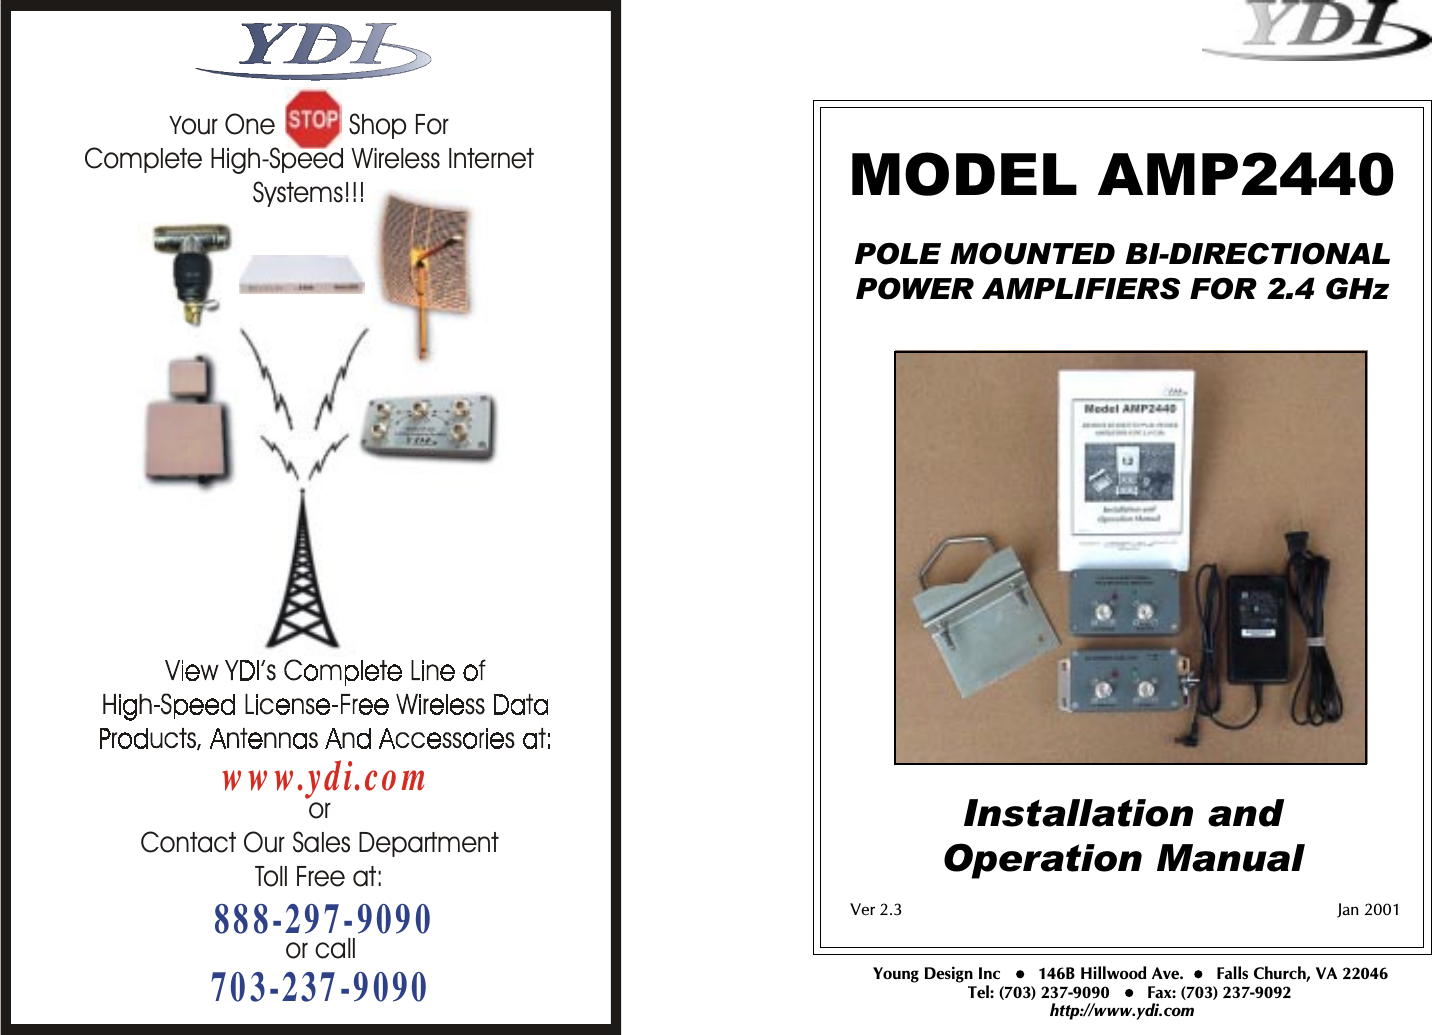   Model AMP2440 REMOTE BI-DIRECTIONAL POWER AMPLIFIERS FOR 2.4 GHz  Installation and  Operation Manual   Version 2.0                                                                                                                   May  2000   MODEL AMP2440POLE MOUNTED BI-DIRECTIONALPOWER AMPLIFIERS FOR 2.4 GHzInstallation andOperation ManualVer 2.3 Jan 2001             Young Design Inc        146B Hillwood Ave.       Falls Church, VA 22046    Tel: (703) 237-9090        Fax: (703) 237-9092http://www.ydi.com;our One          Shop For Complete High-Speed Wireless Internet Systems!!!www.ydi.comorContact Our Sales DepartmentToll Free at:888-297-9090703-237-9090or call